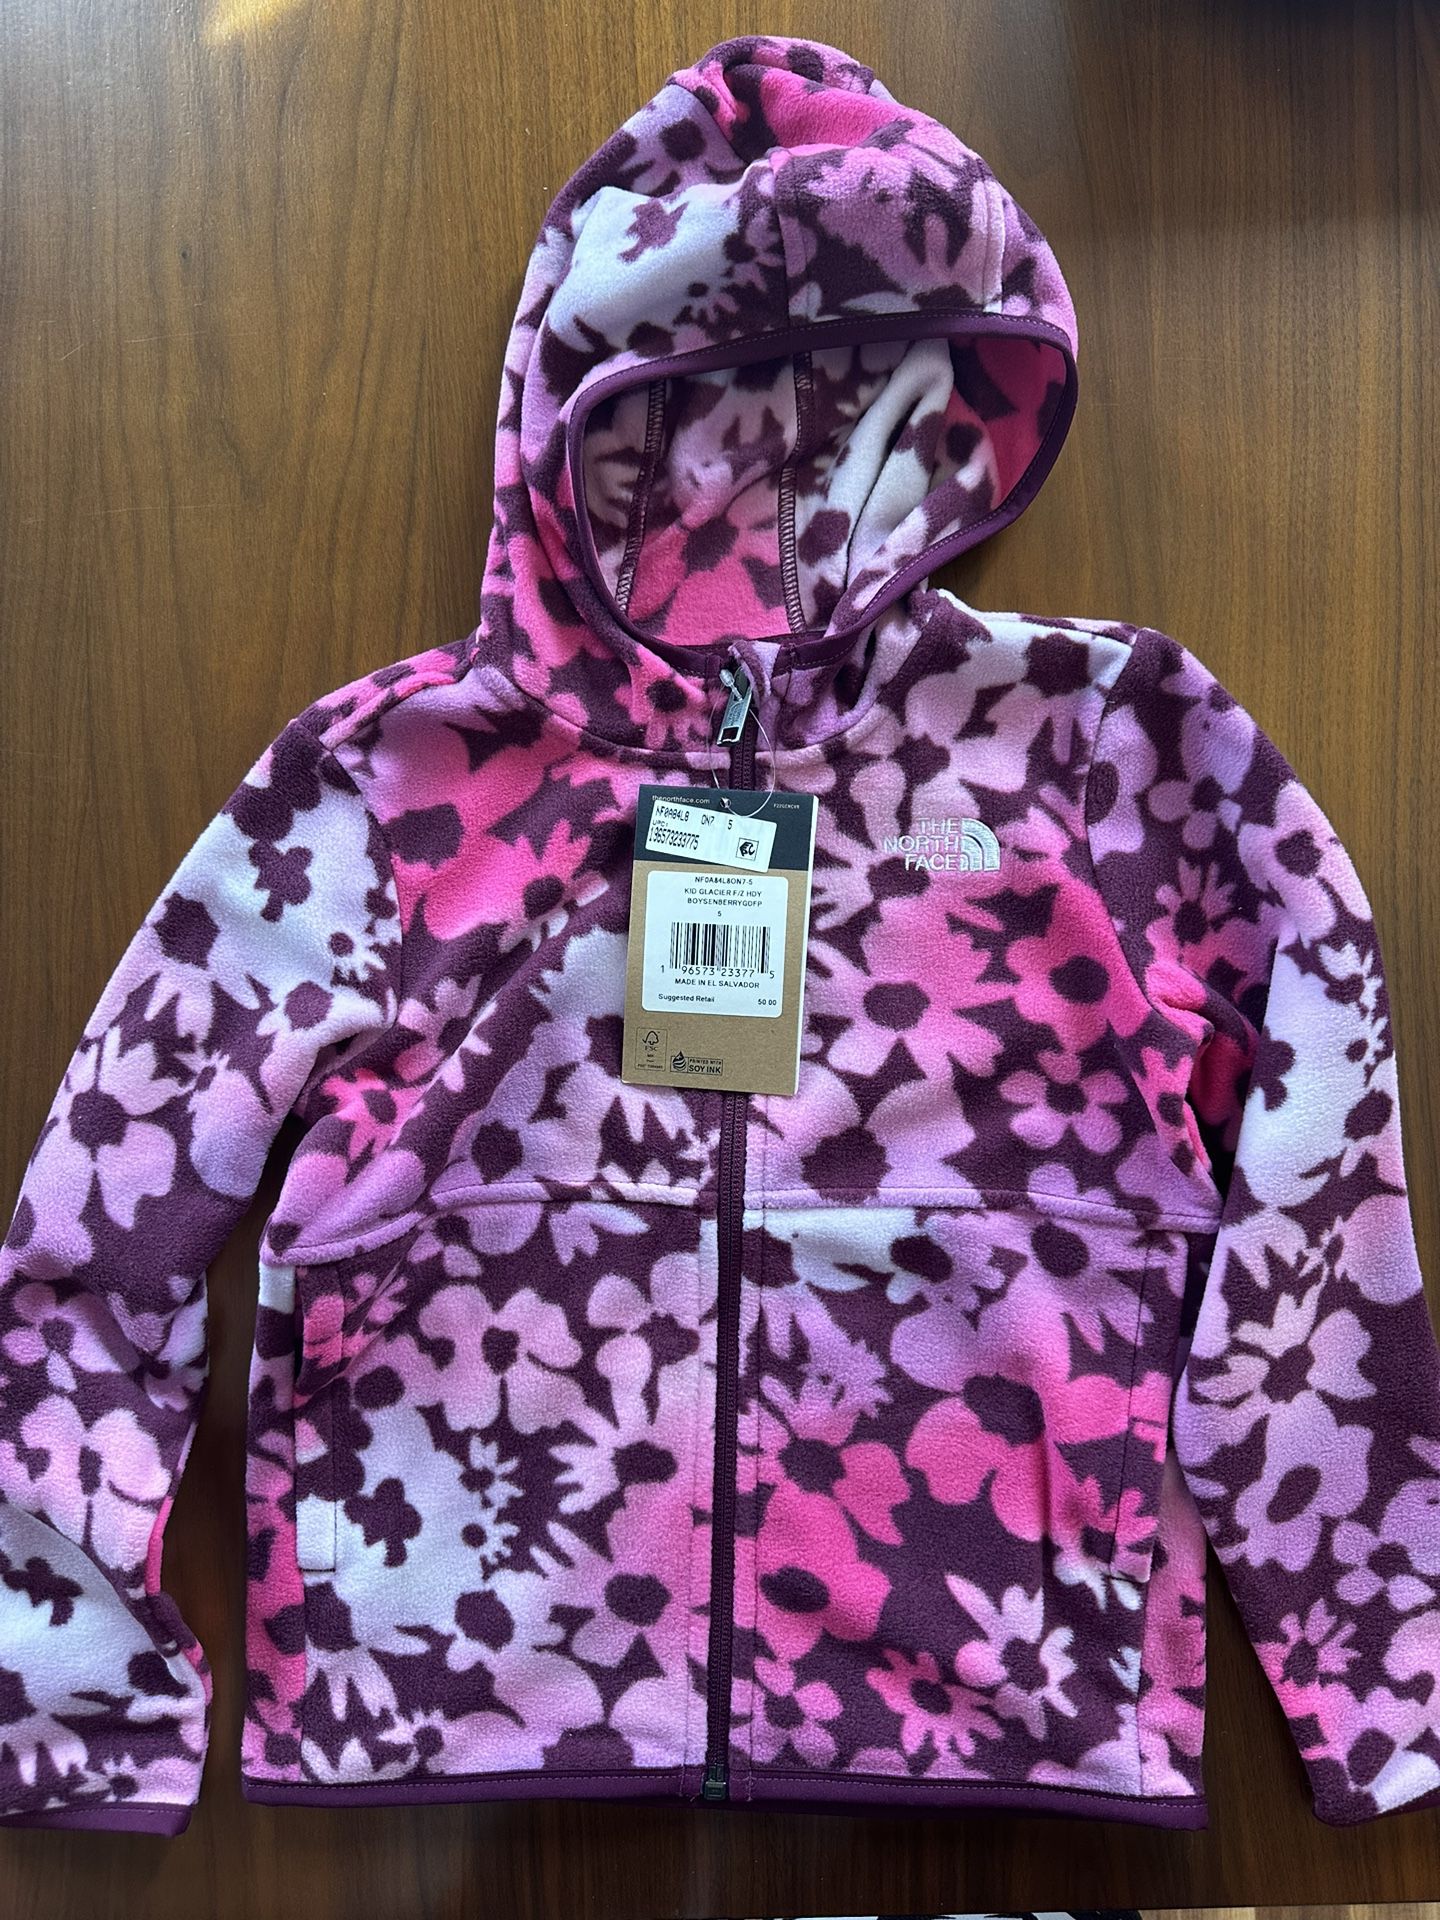 The North Face hoodie kids size 5 - Brand New